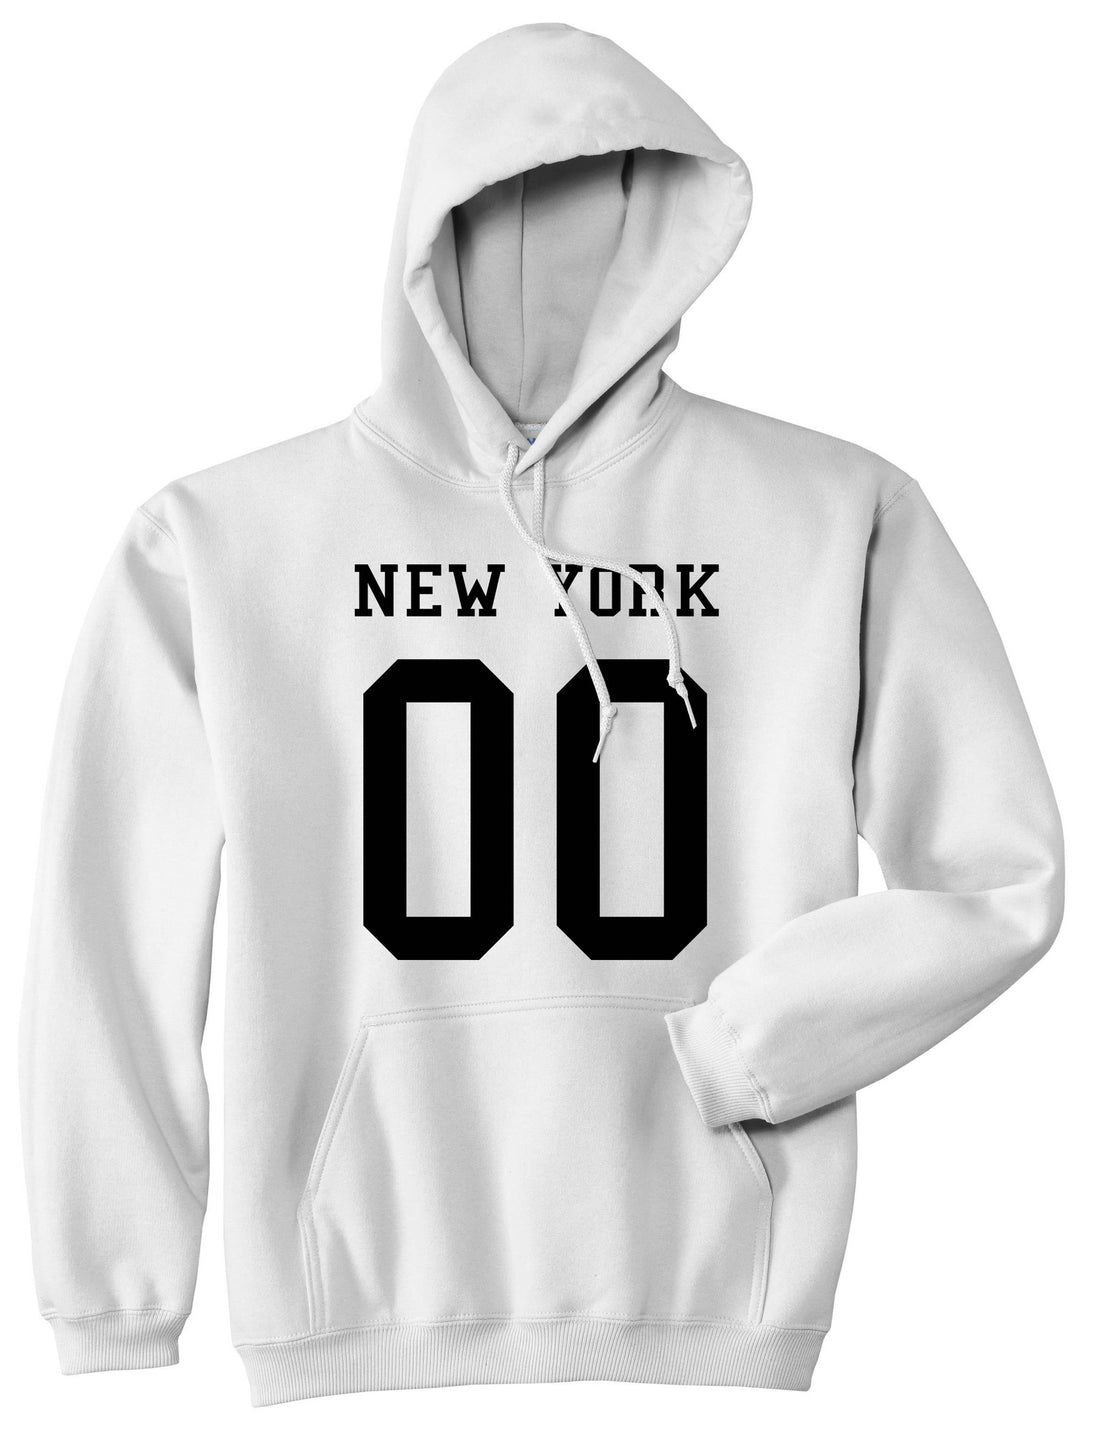 New York Team 00 Jersey Boys Kids Pullover Hoodie Hoody in White By Kings Of NY